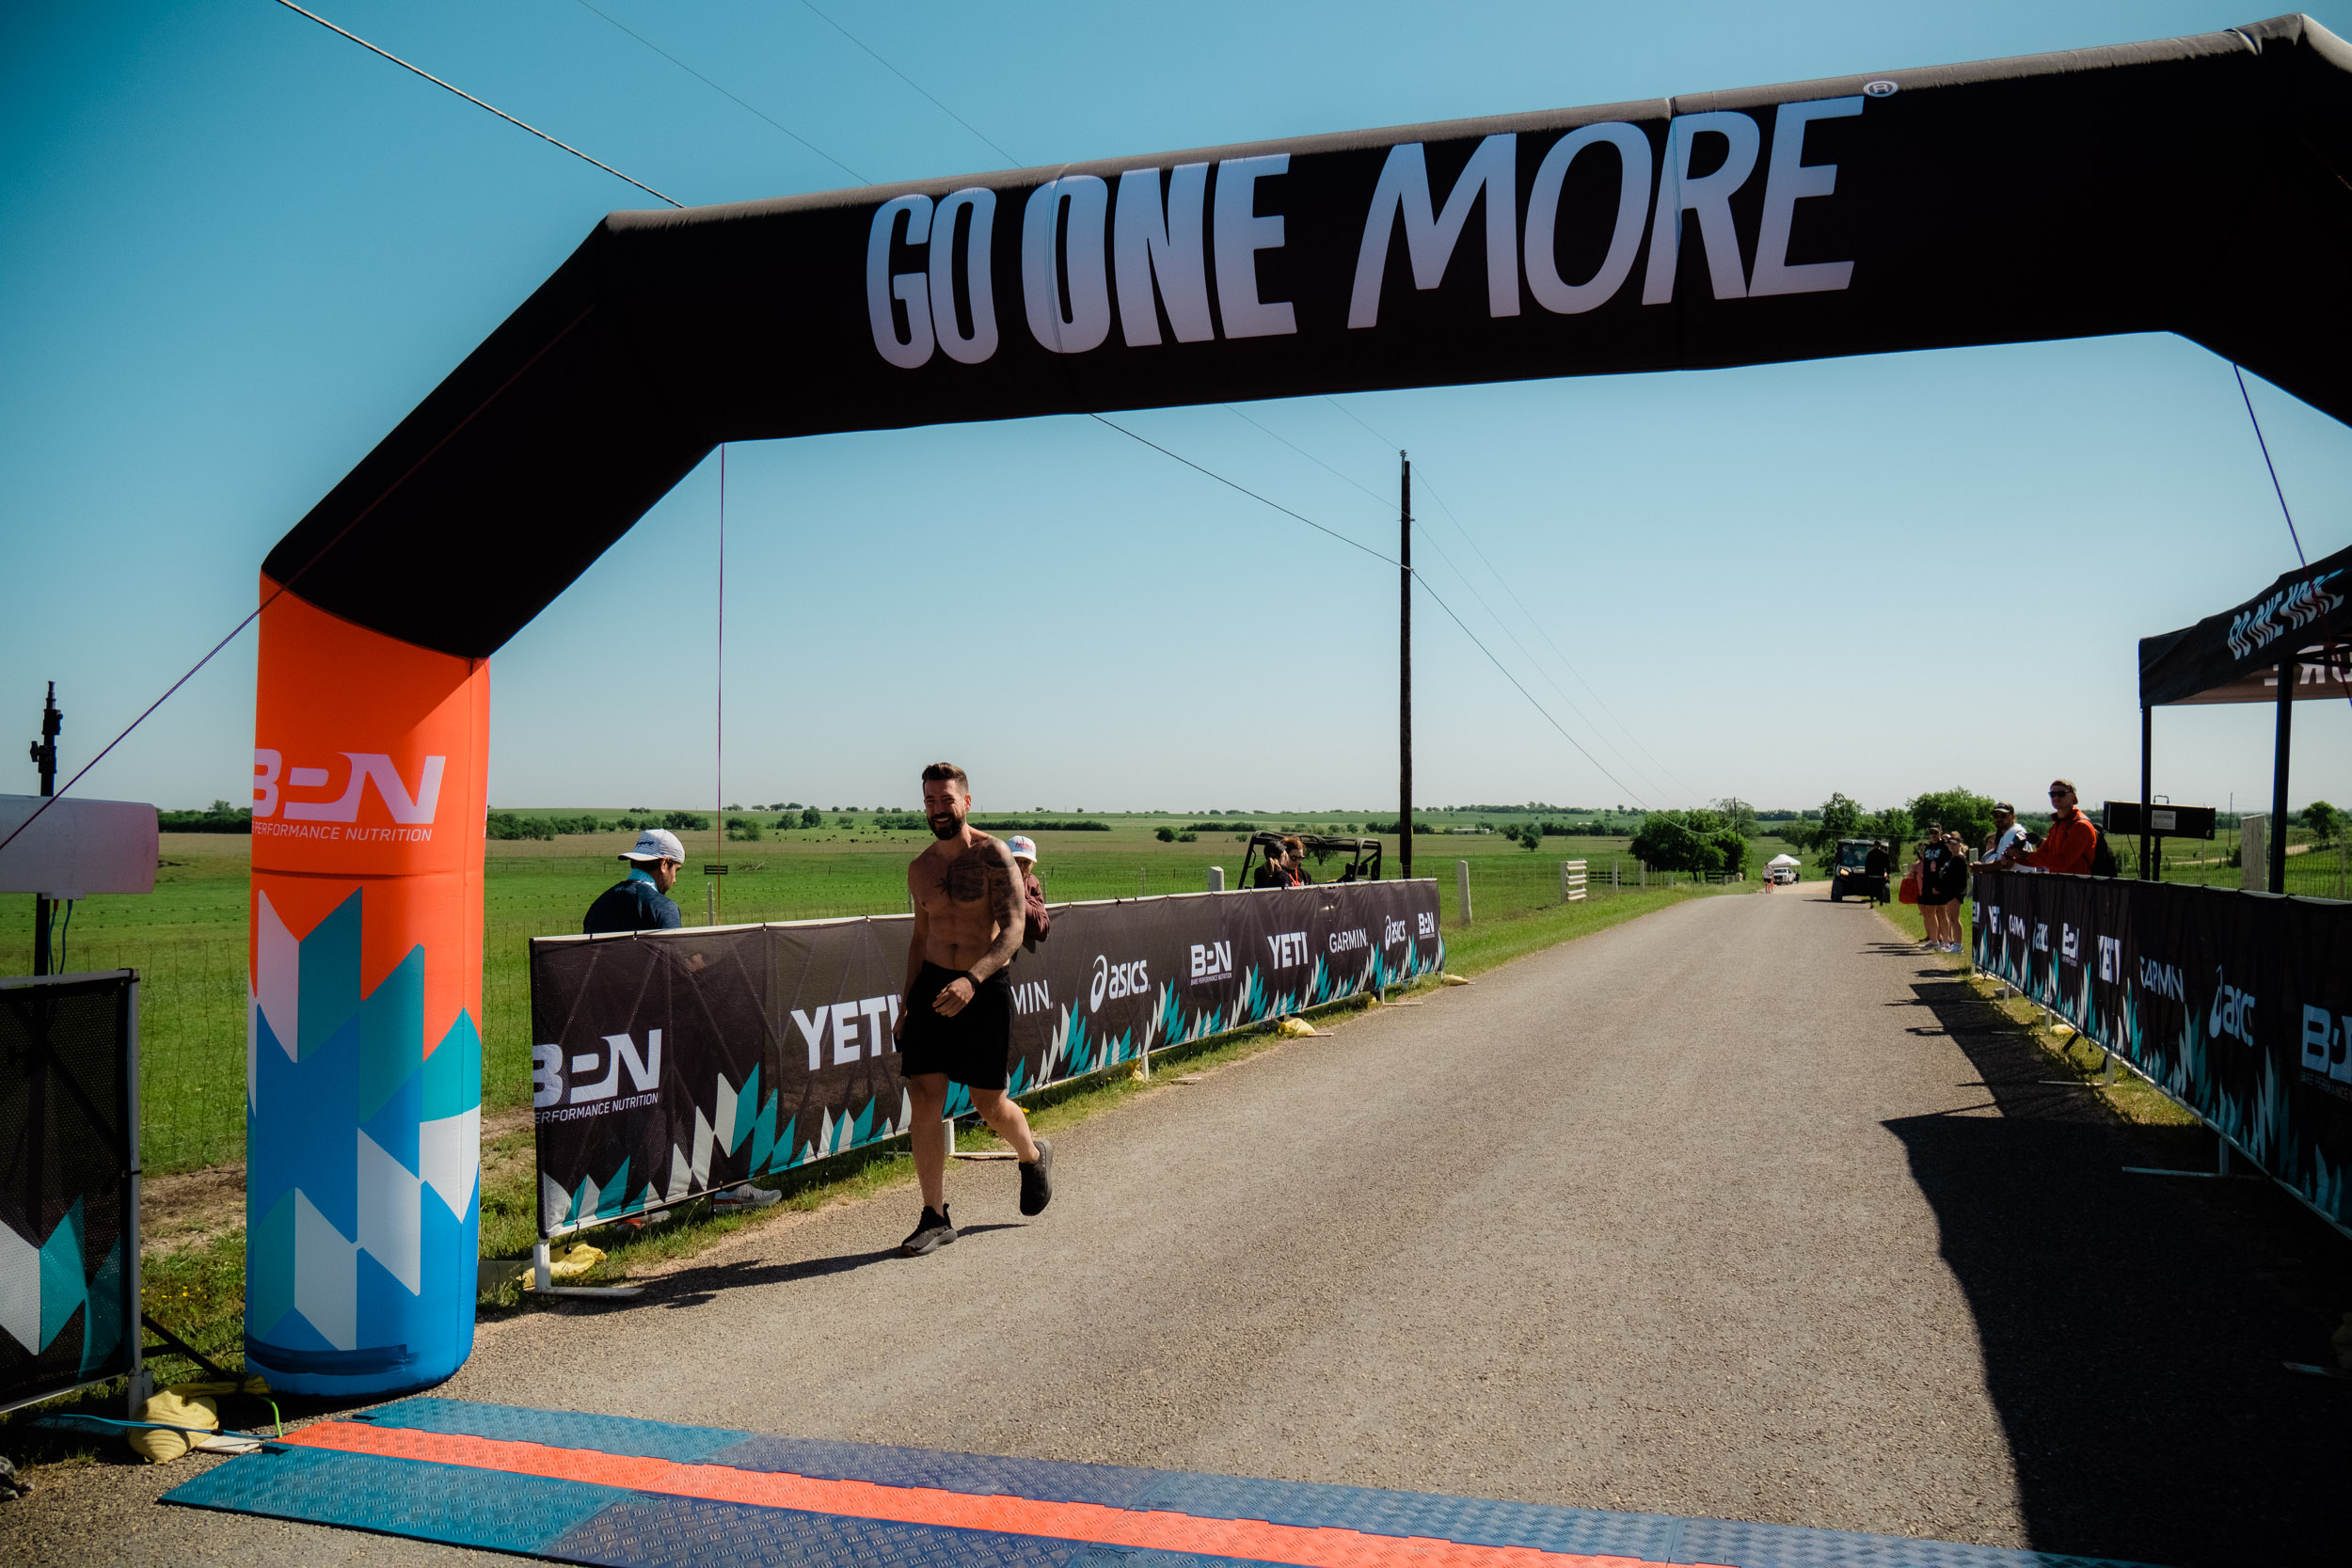 Author Charles Thorp crossing the finish line at the Go One More Marathon.